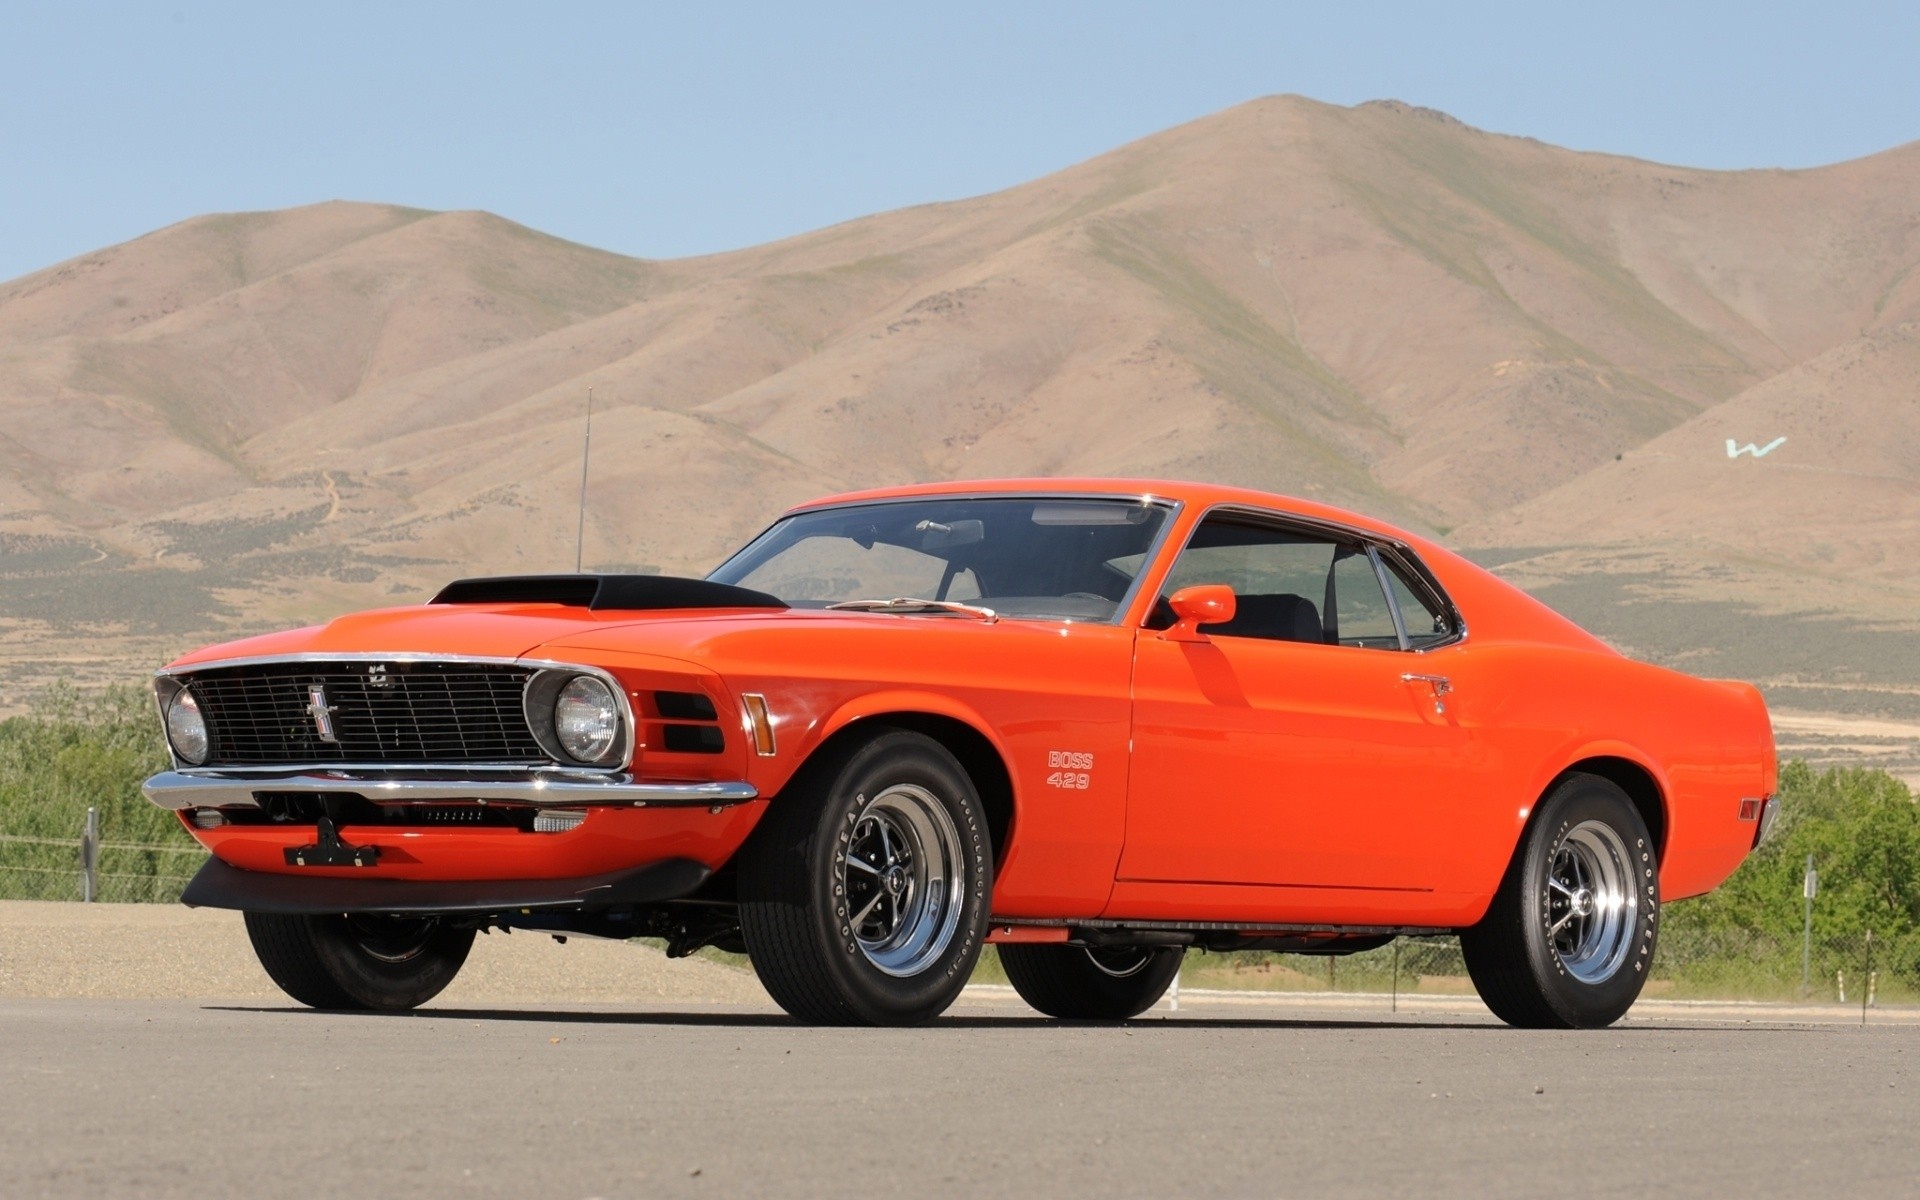 cars, Ford, muscle cars, vehicles, Ford Mustang, orange cars - desktop wallpaper